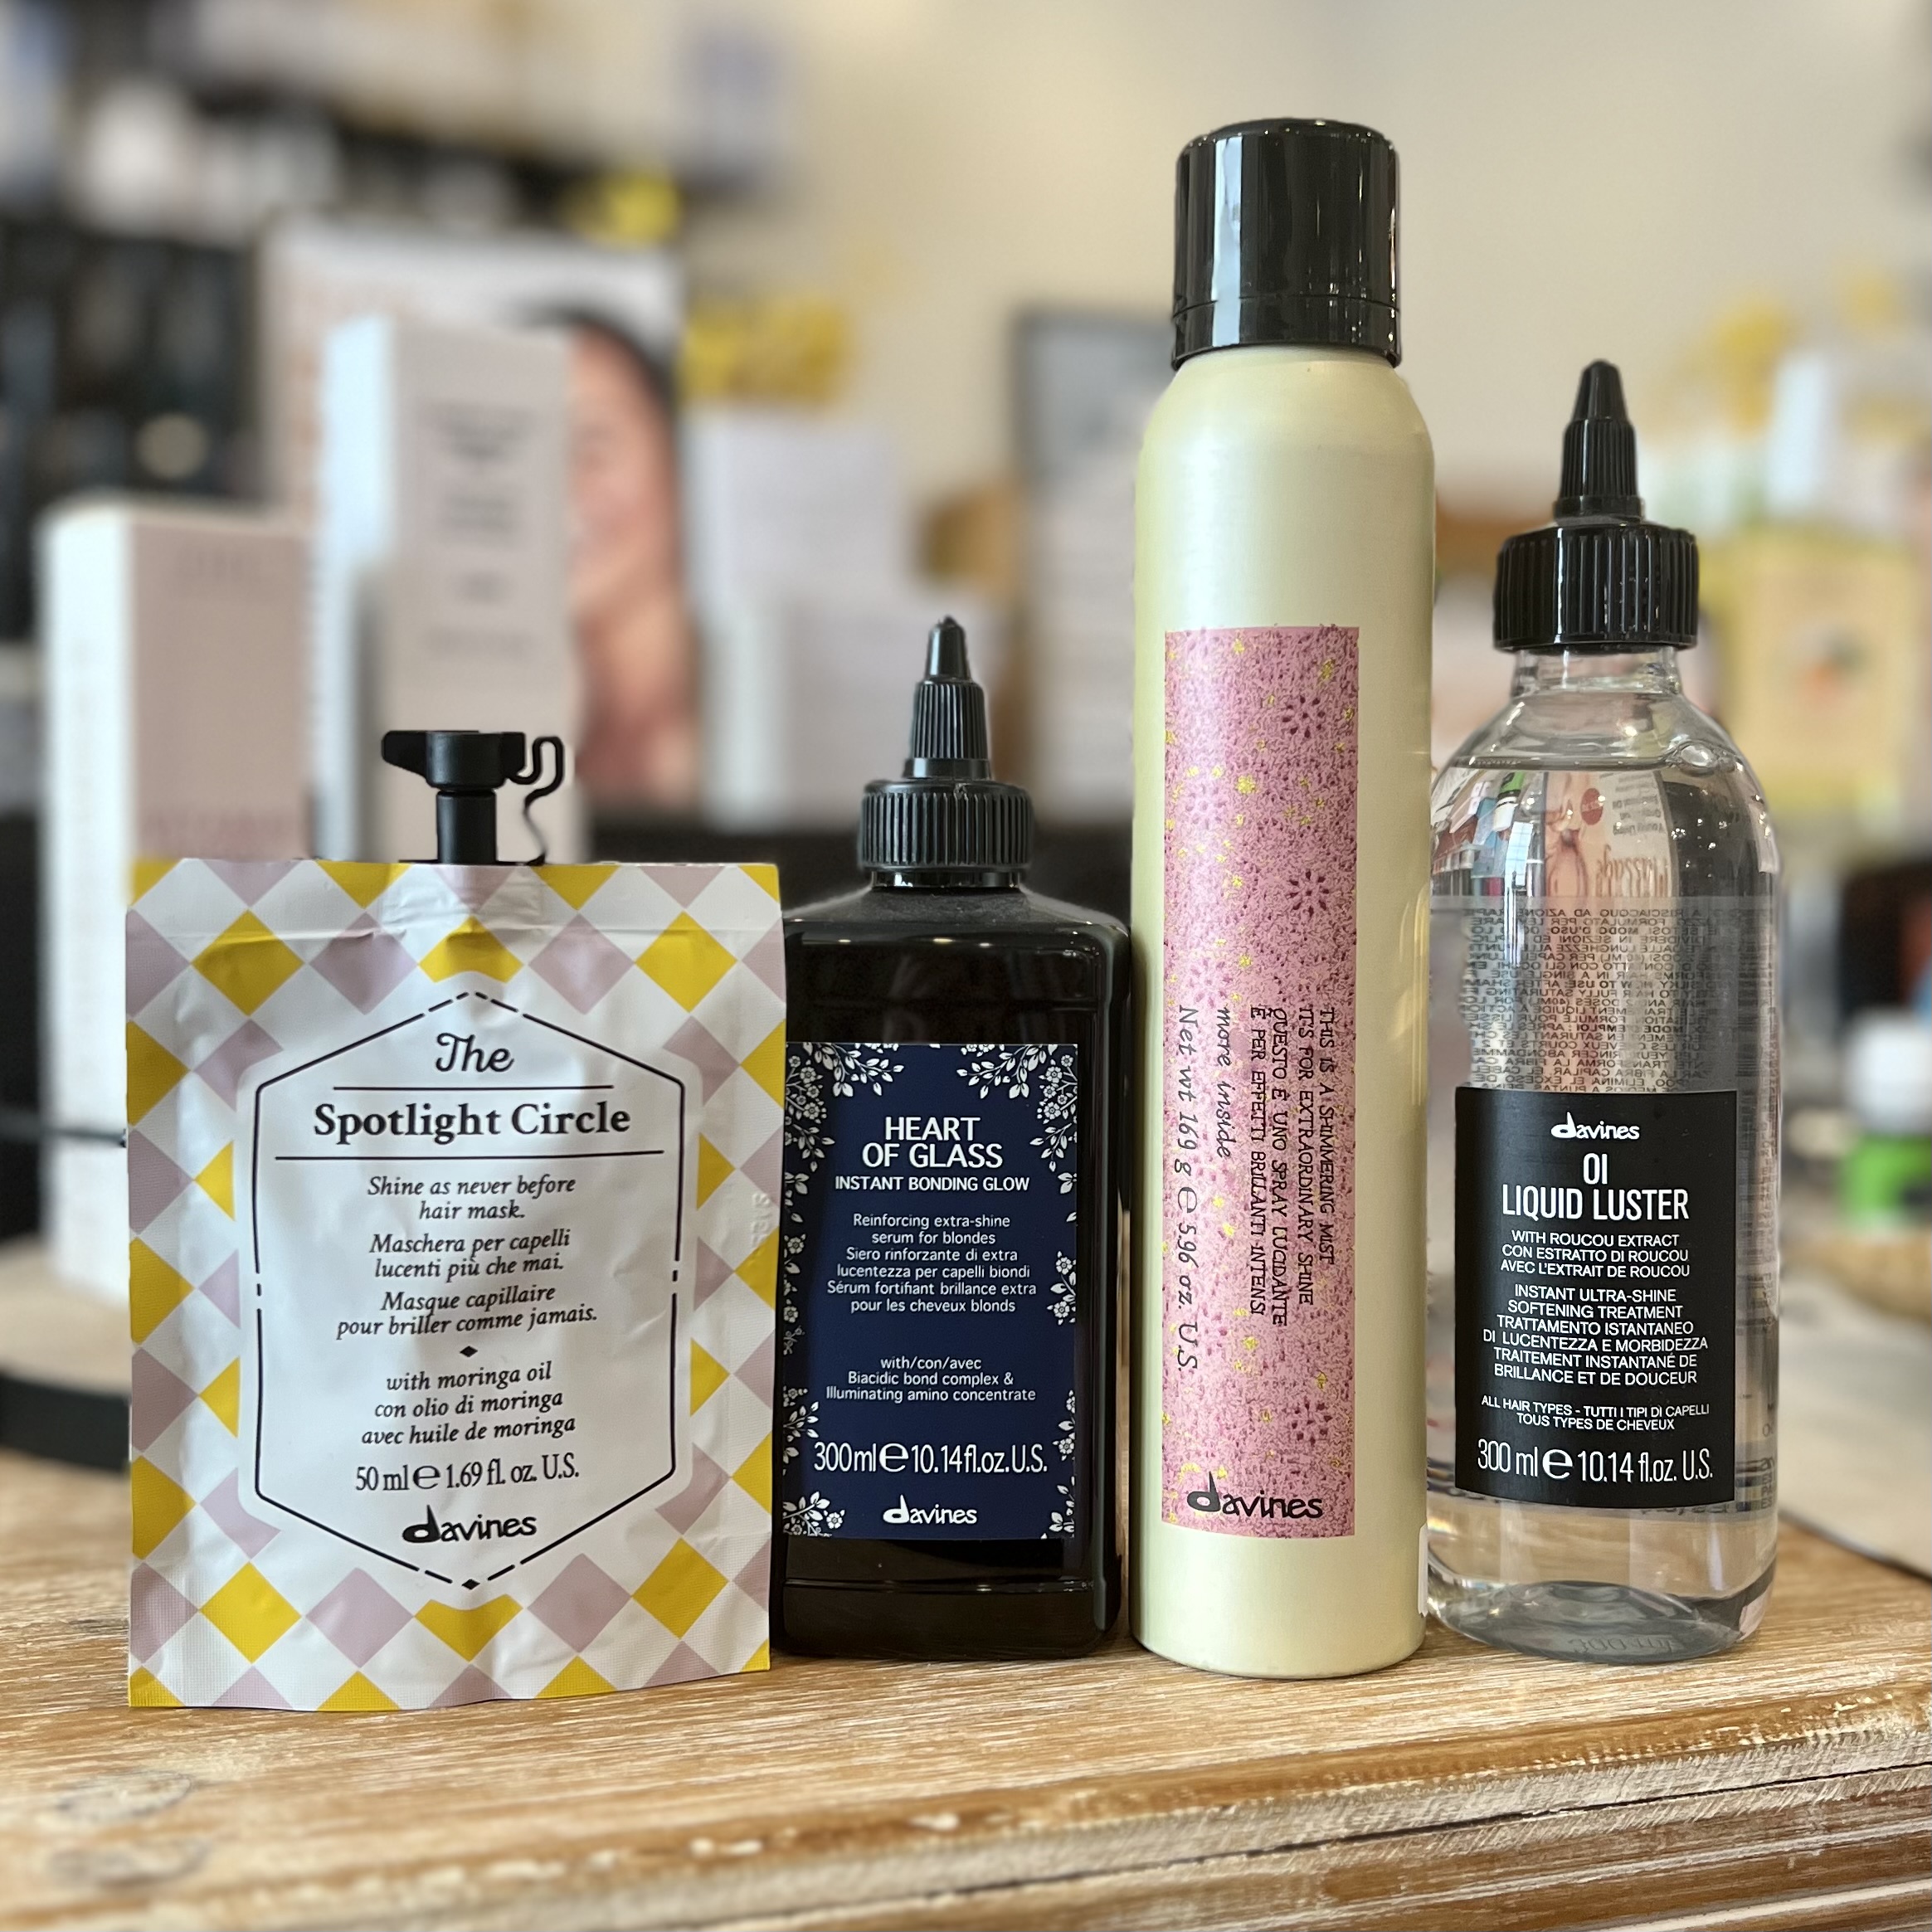 Restore shine to dull hair with Davines' The Spotlight Circle Chronicles Mask, Heart of Glass Instant Bonding Glow Treatment, This is a Shimmering Mist, and Oi Liquid Luster.